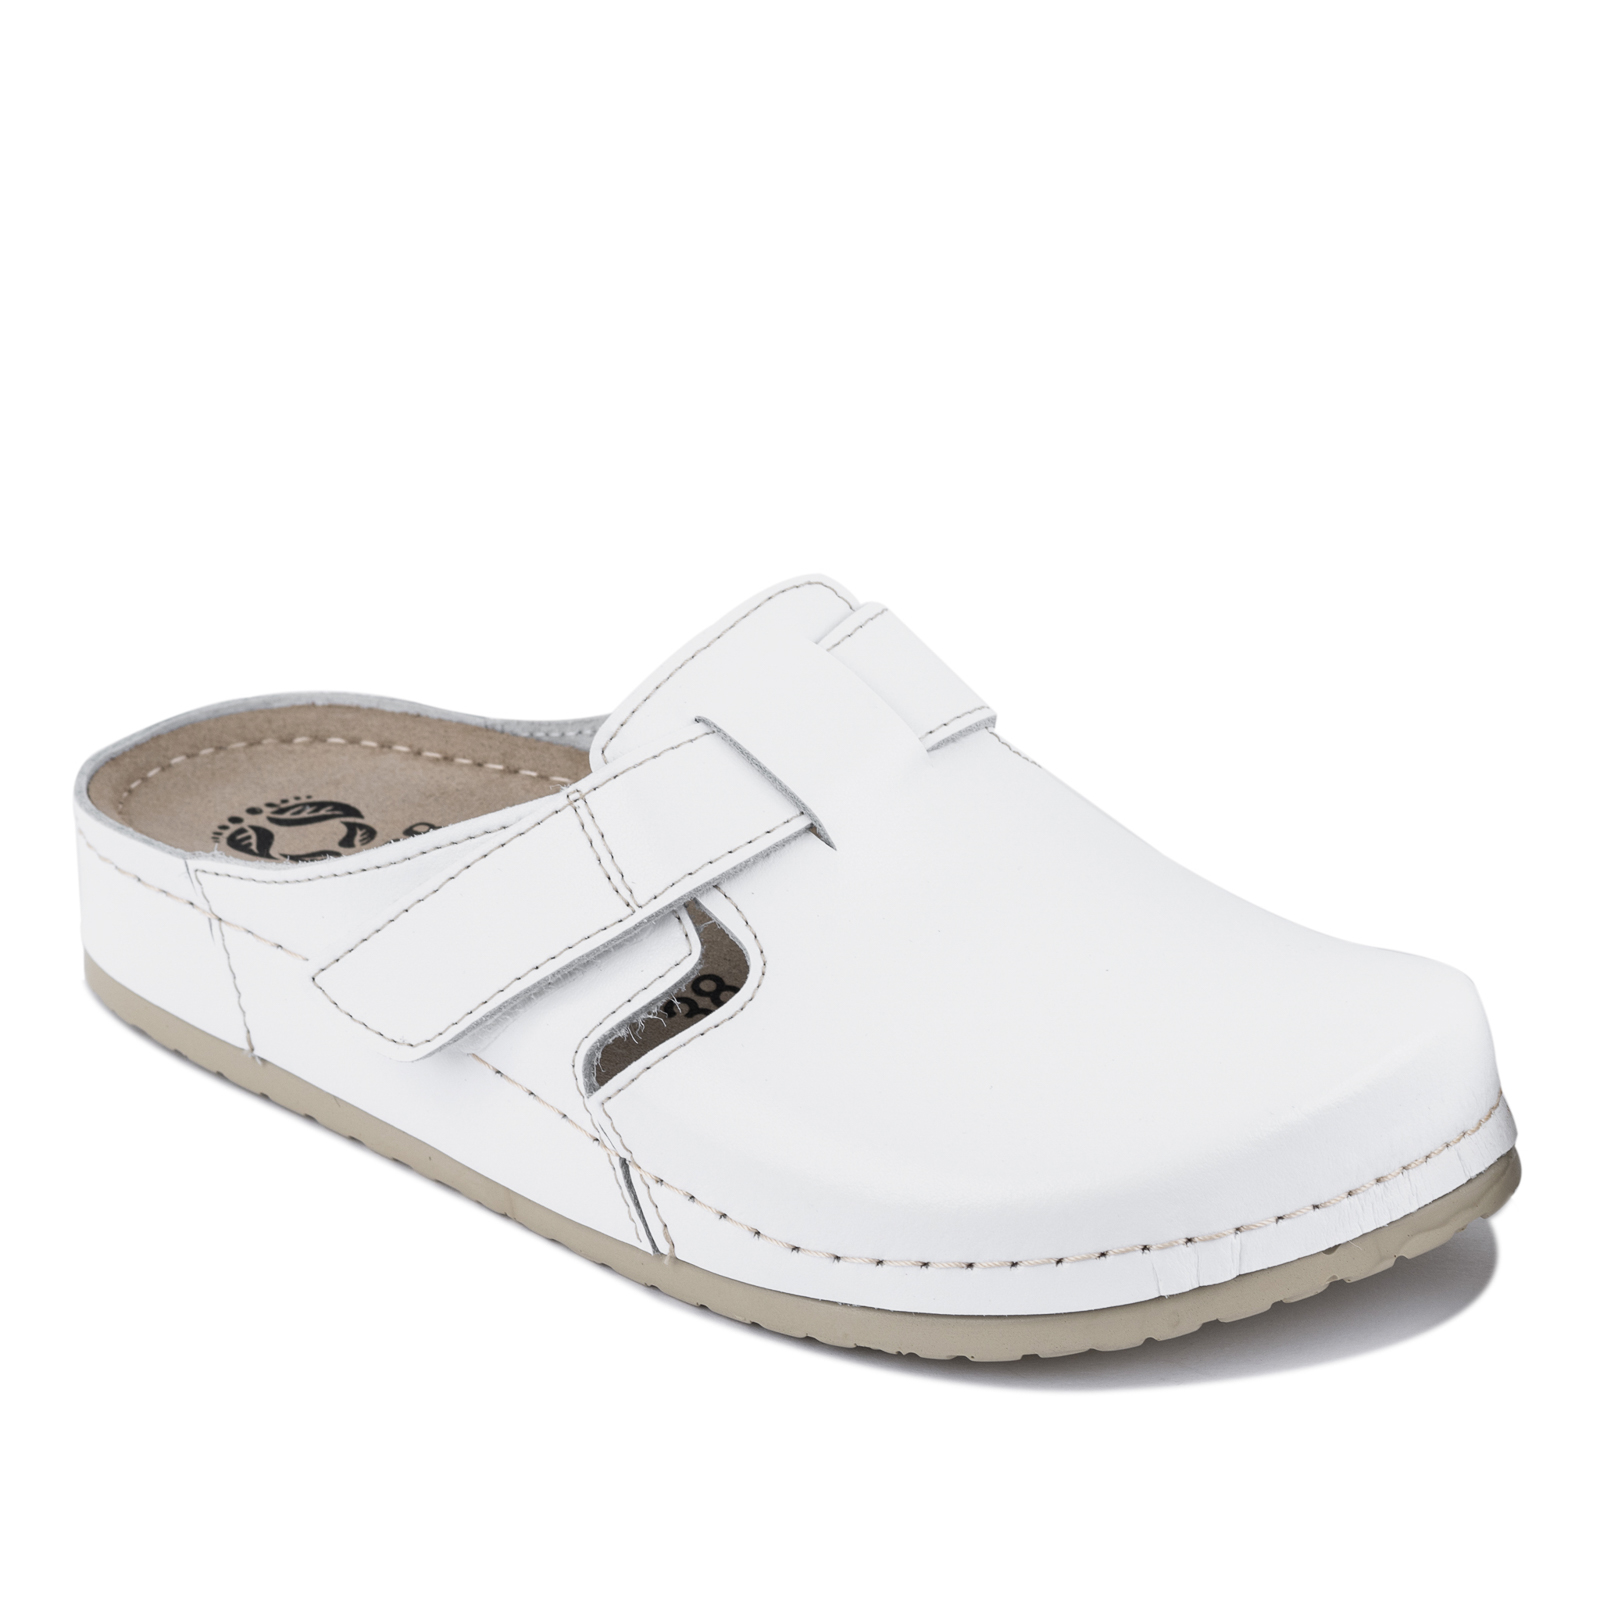 ANATOMIC LEATHER  CLOGS WITH VELCRO BAND - WHITE